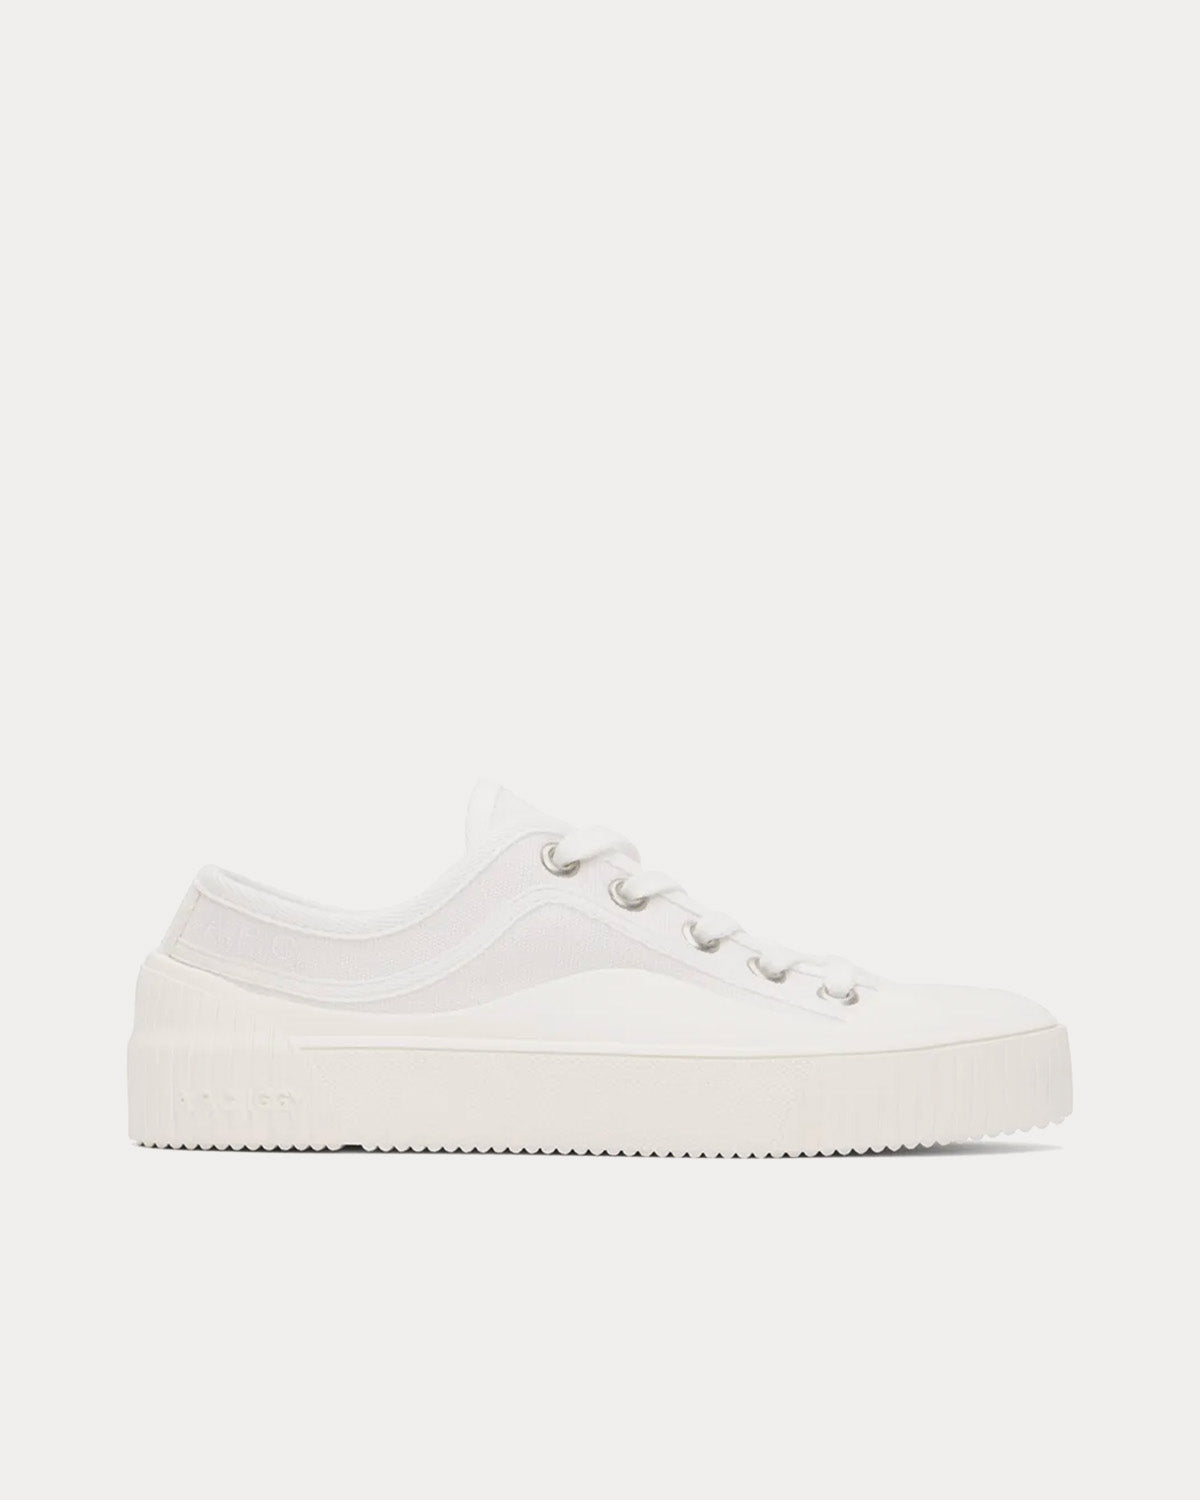 A.P.C. - Iggy Basse White Low Top Sneakers